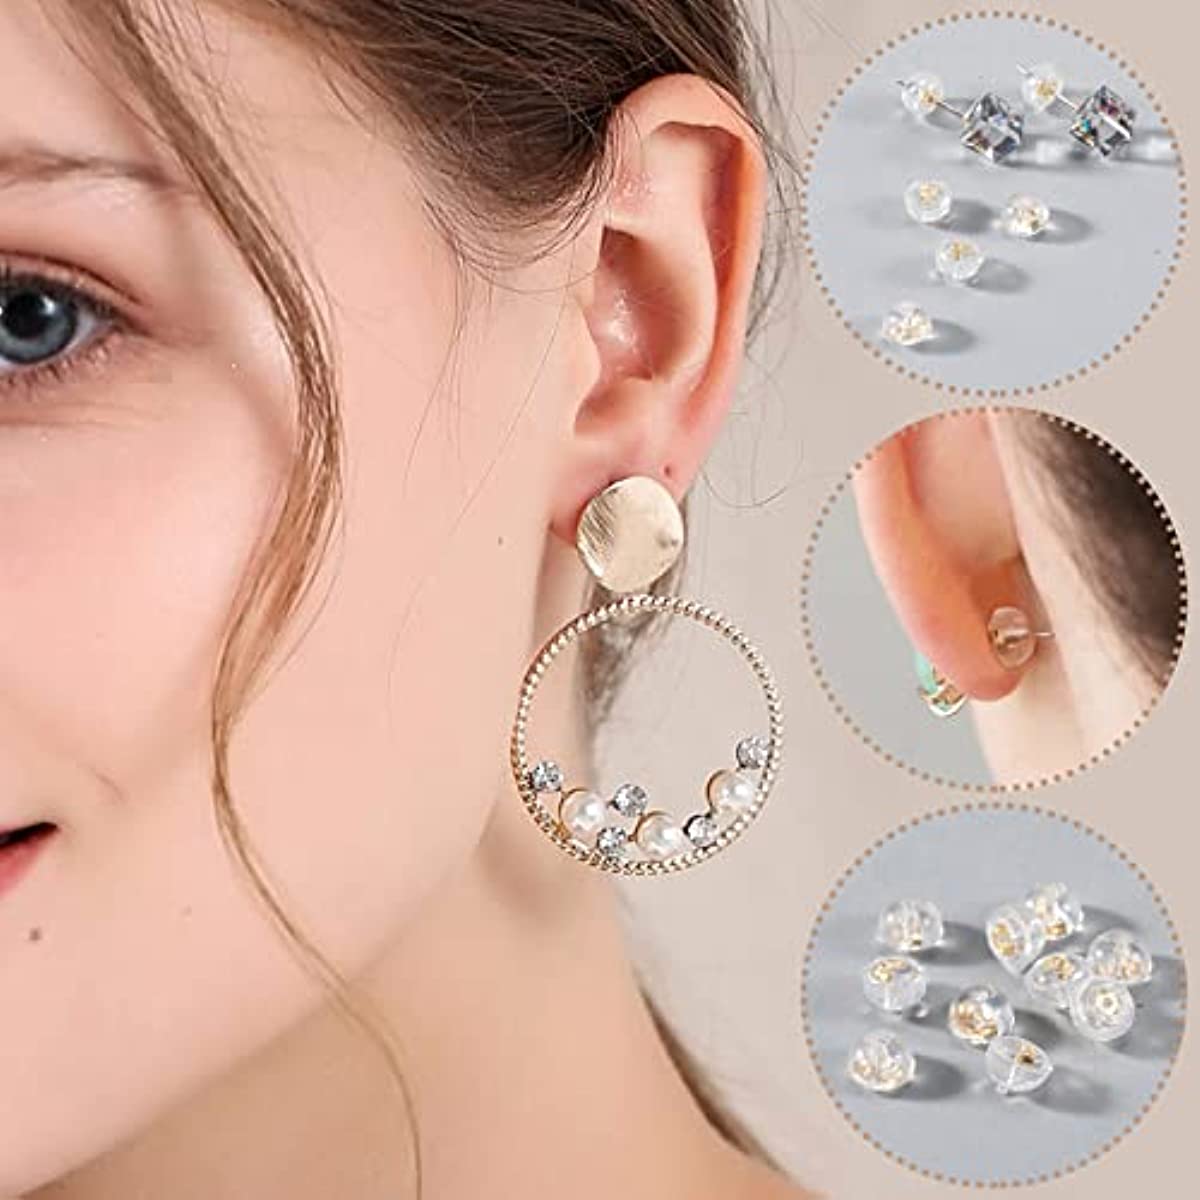 10 X 6 Mm , Gold Color Earring Backs ,silicone Clear Earring Backs